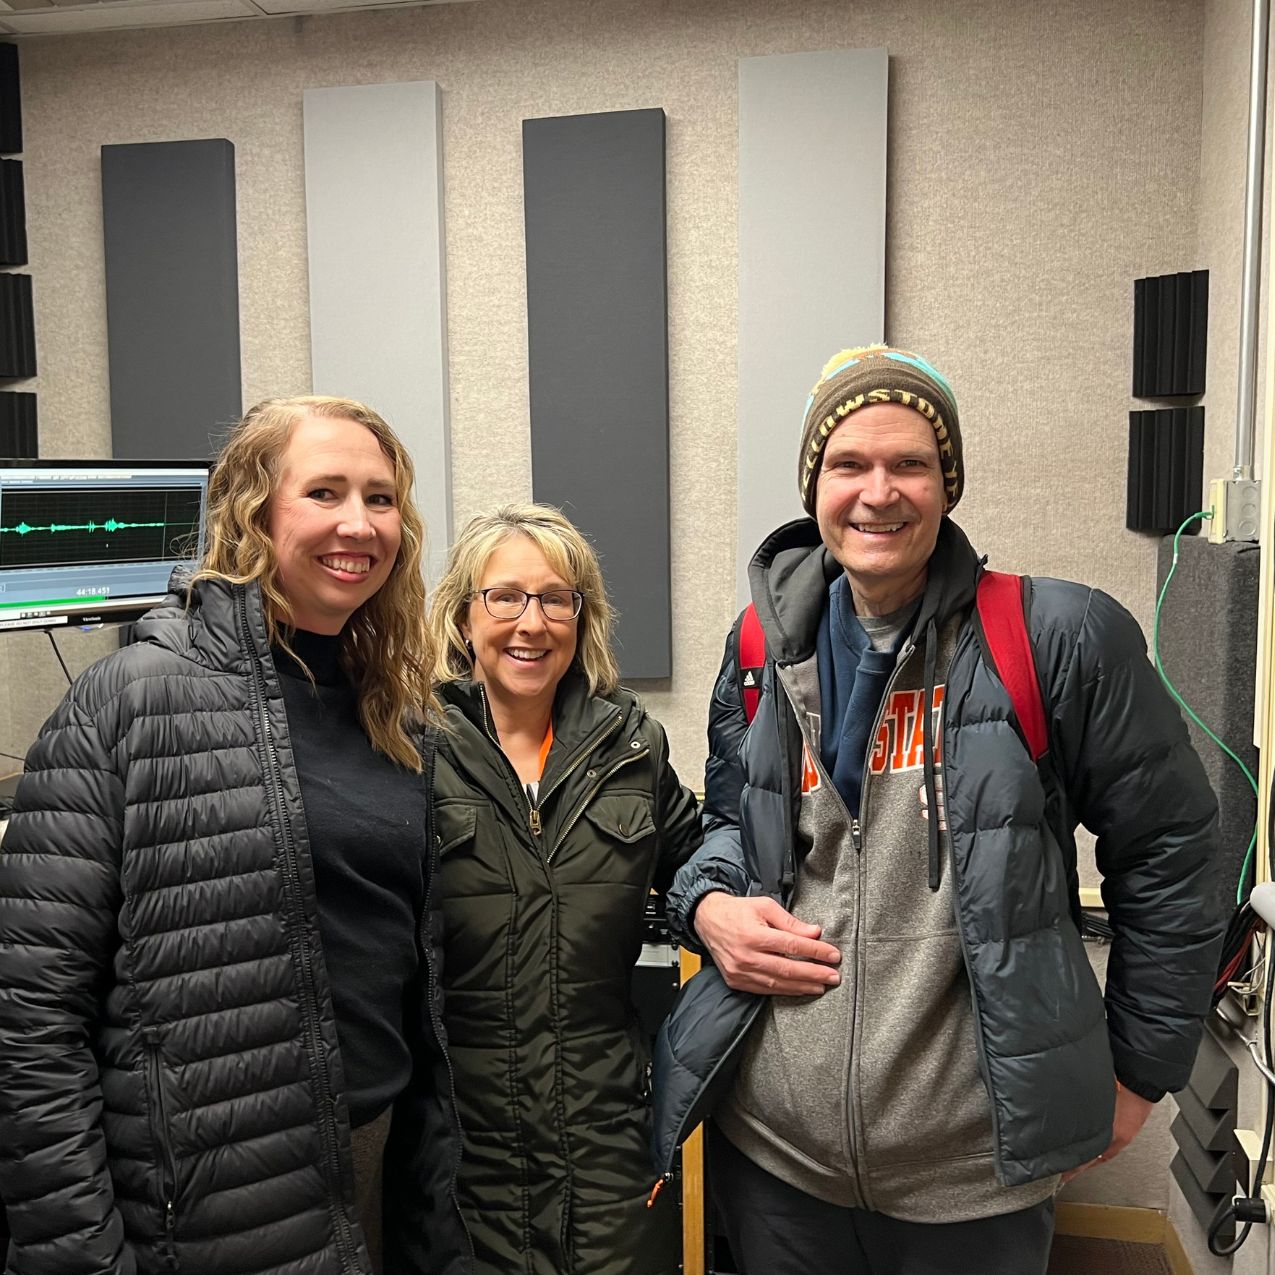 Whitney Fenwich, ISU alumna, Kandi Turley Ames, Dean of the College of Arts and Letters, And Mark McBeth, Proffessor and Chair of the Department of Political Science pose together smiling, in the recording studio. Recording equipment such as a computer screen and speakers are behind them.